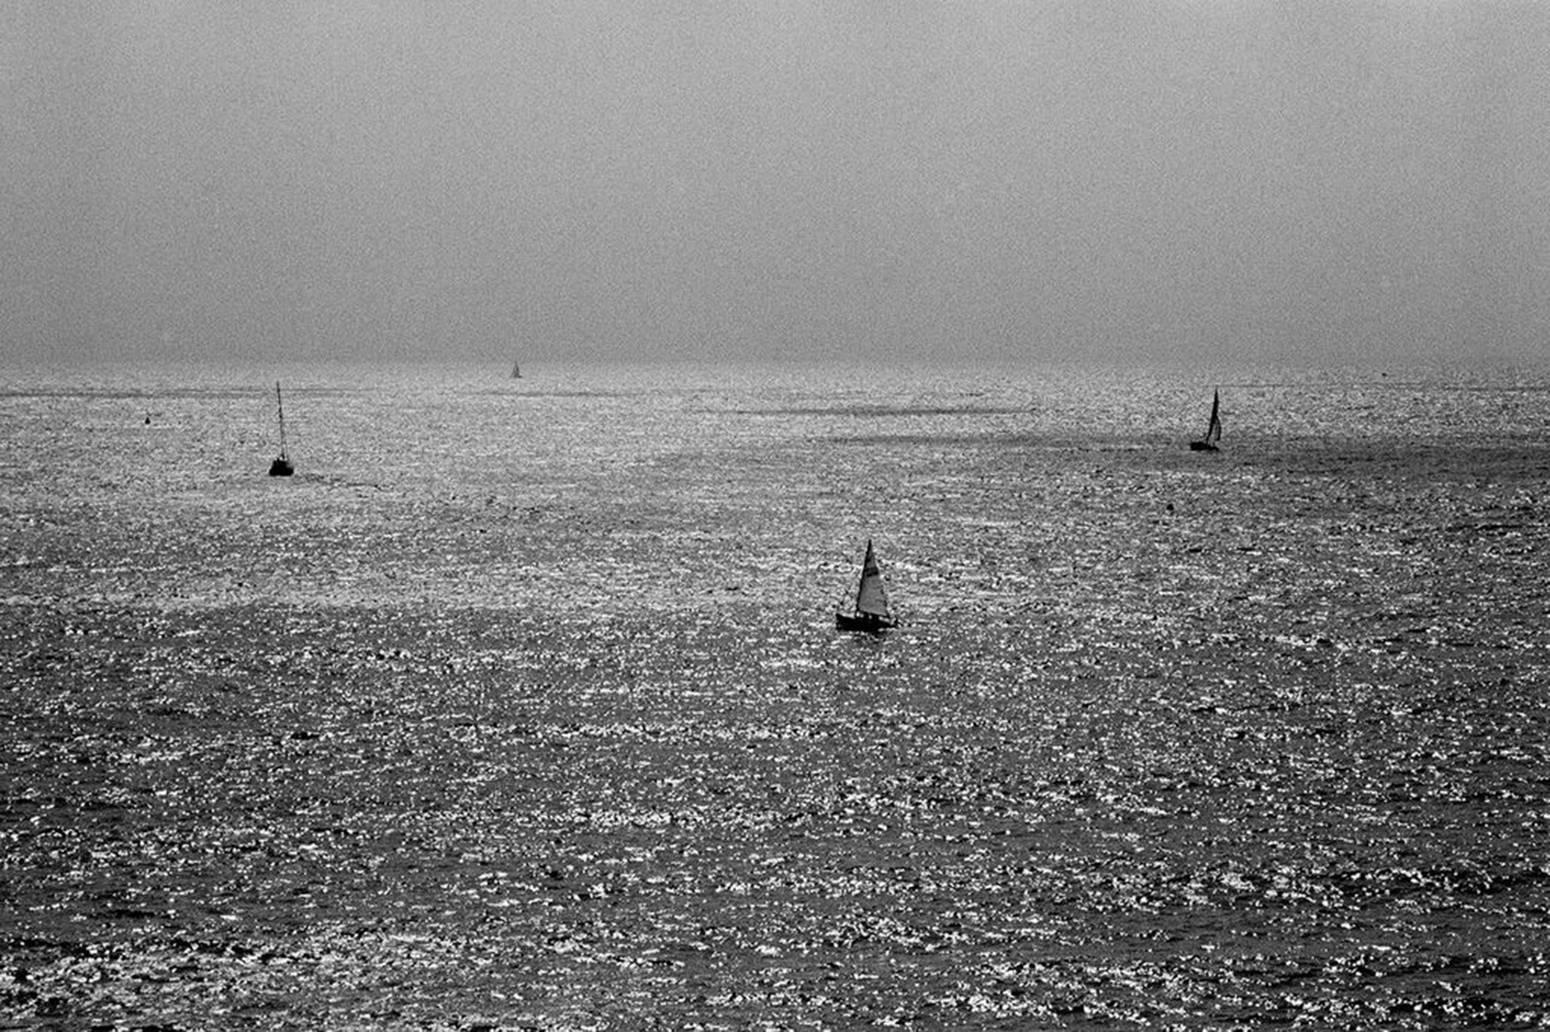 Sailboats, Dartmouth facing the English Channel